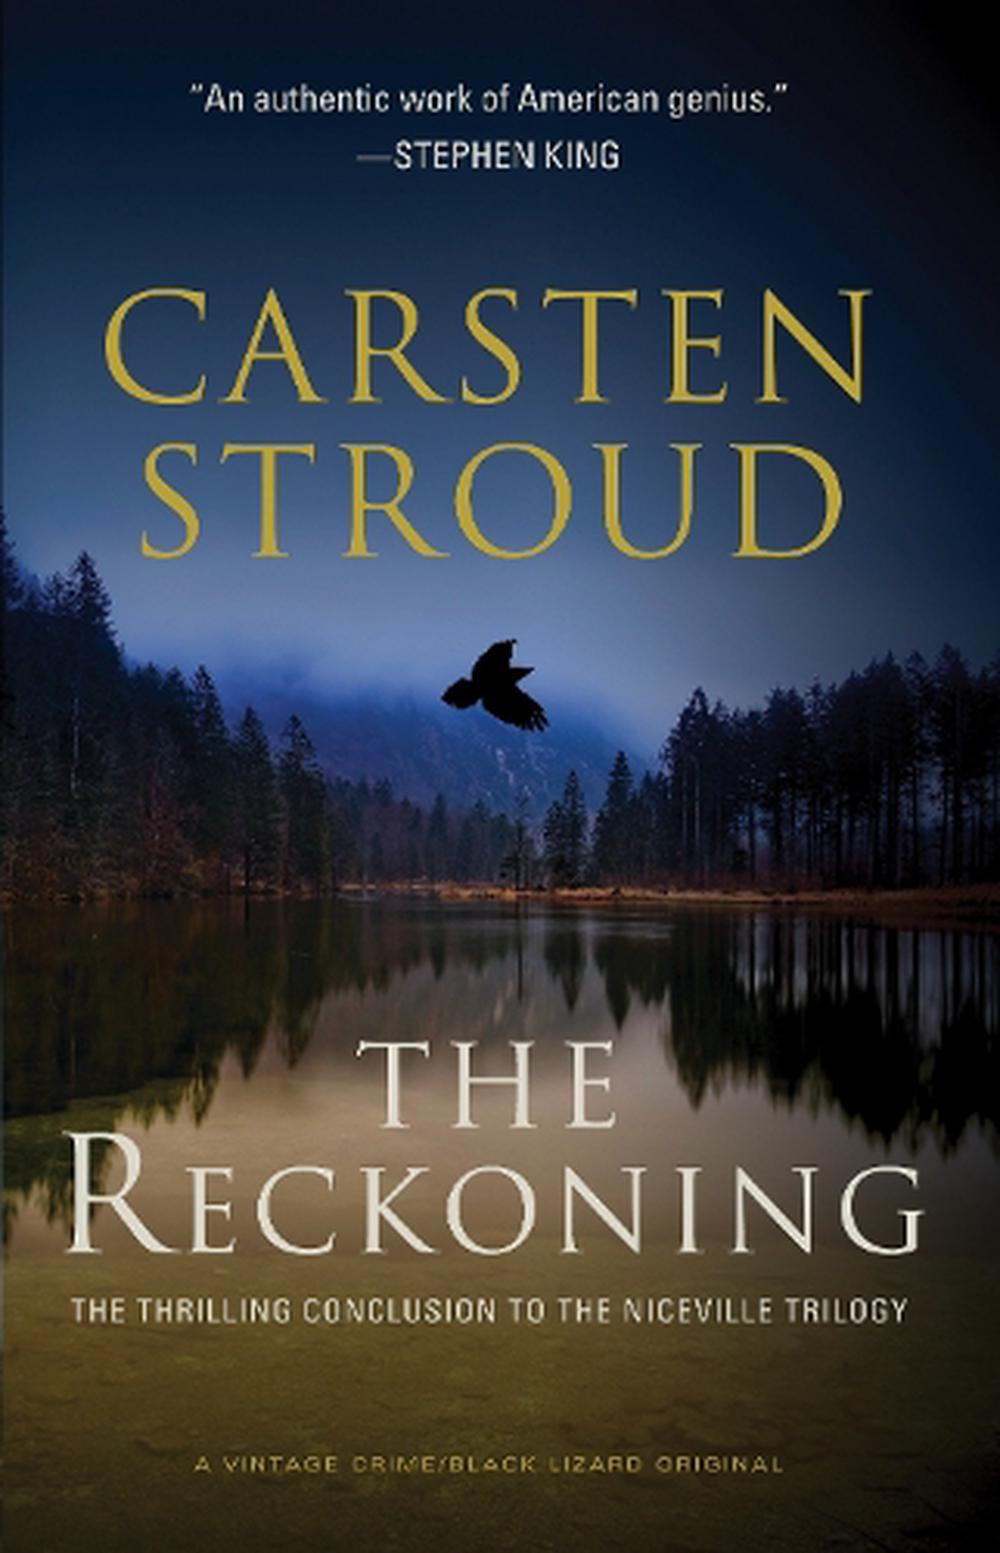 9781101873021　The　of　online　Carsten　at　The　Nile　Three　Niceville　by　Book　Reckoning:　Stroud,　the　Trilogy　Paperback,　Buy